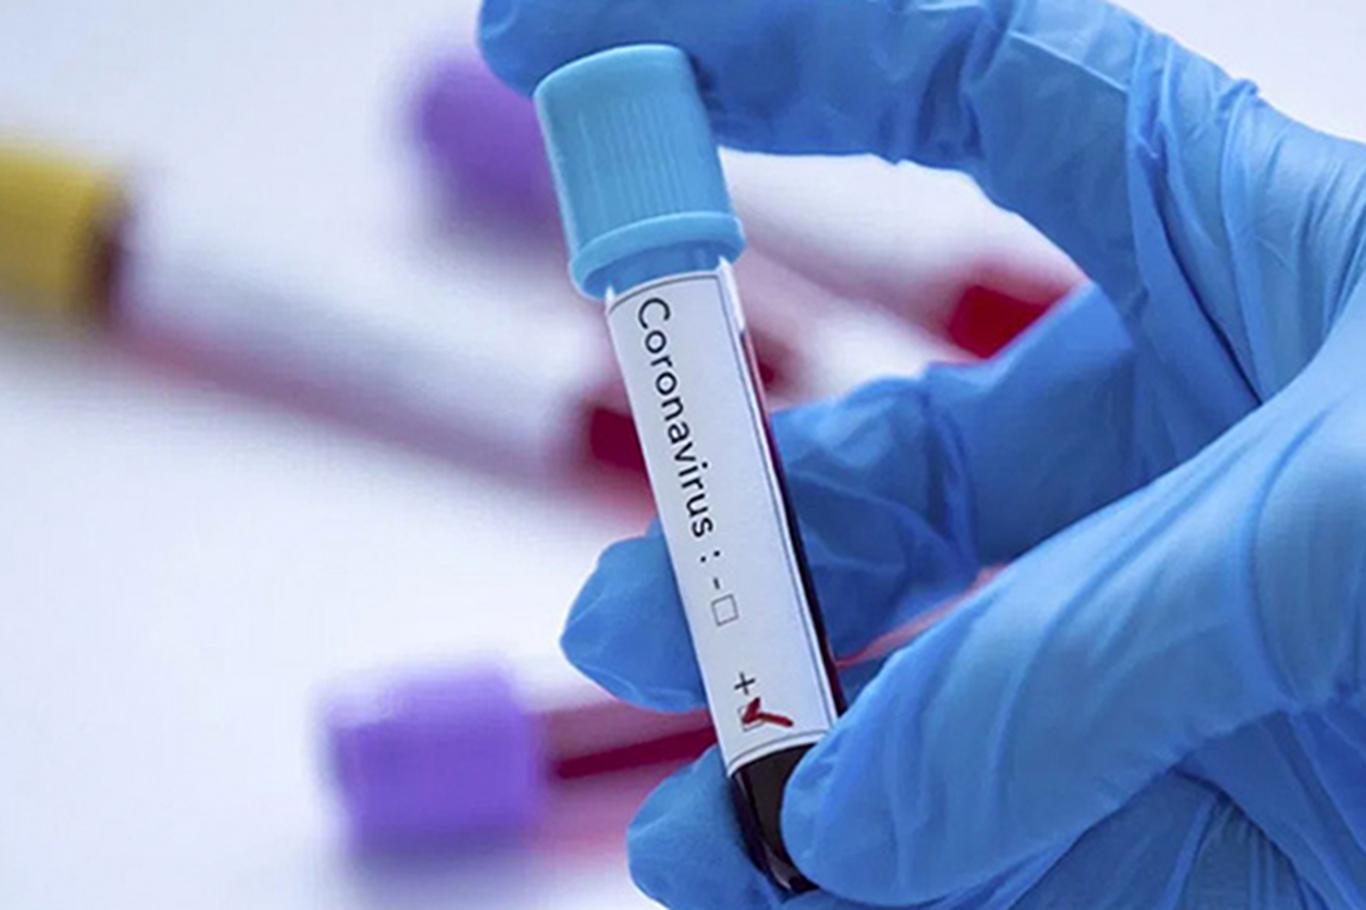 The number of deaths from coronavirus approaches 15,000 in the US